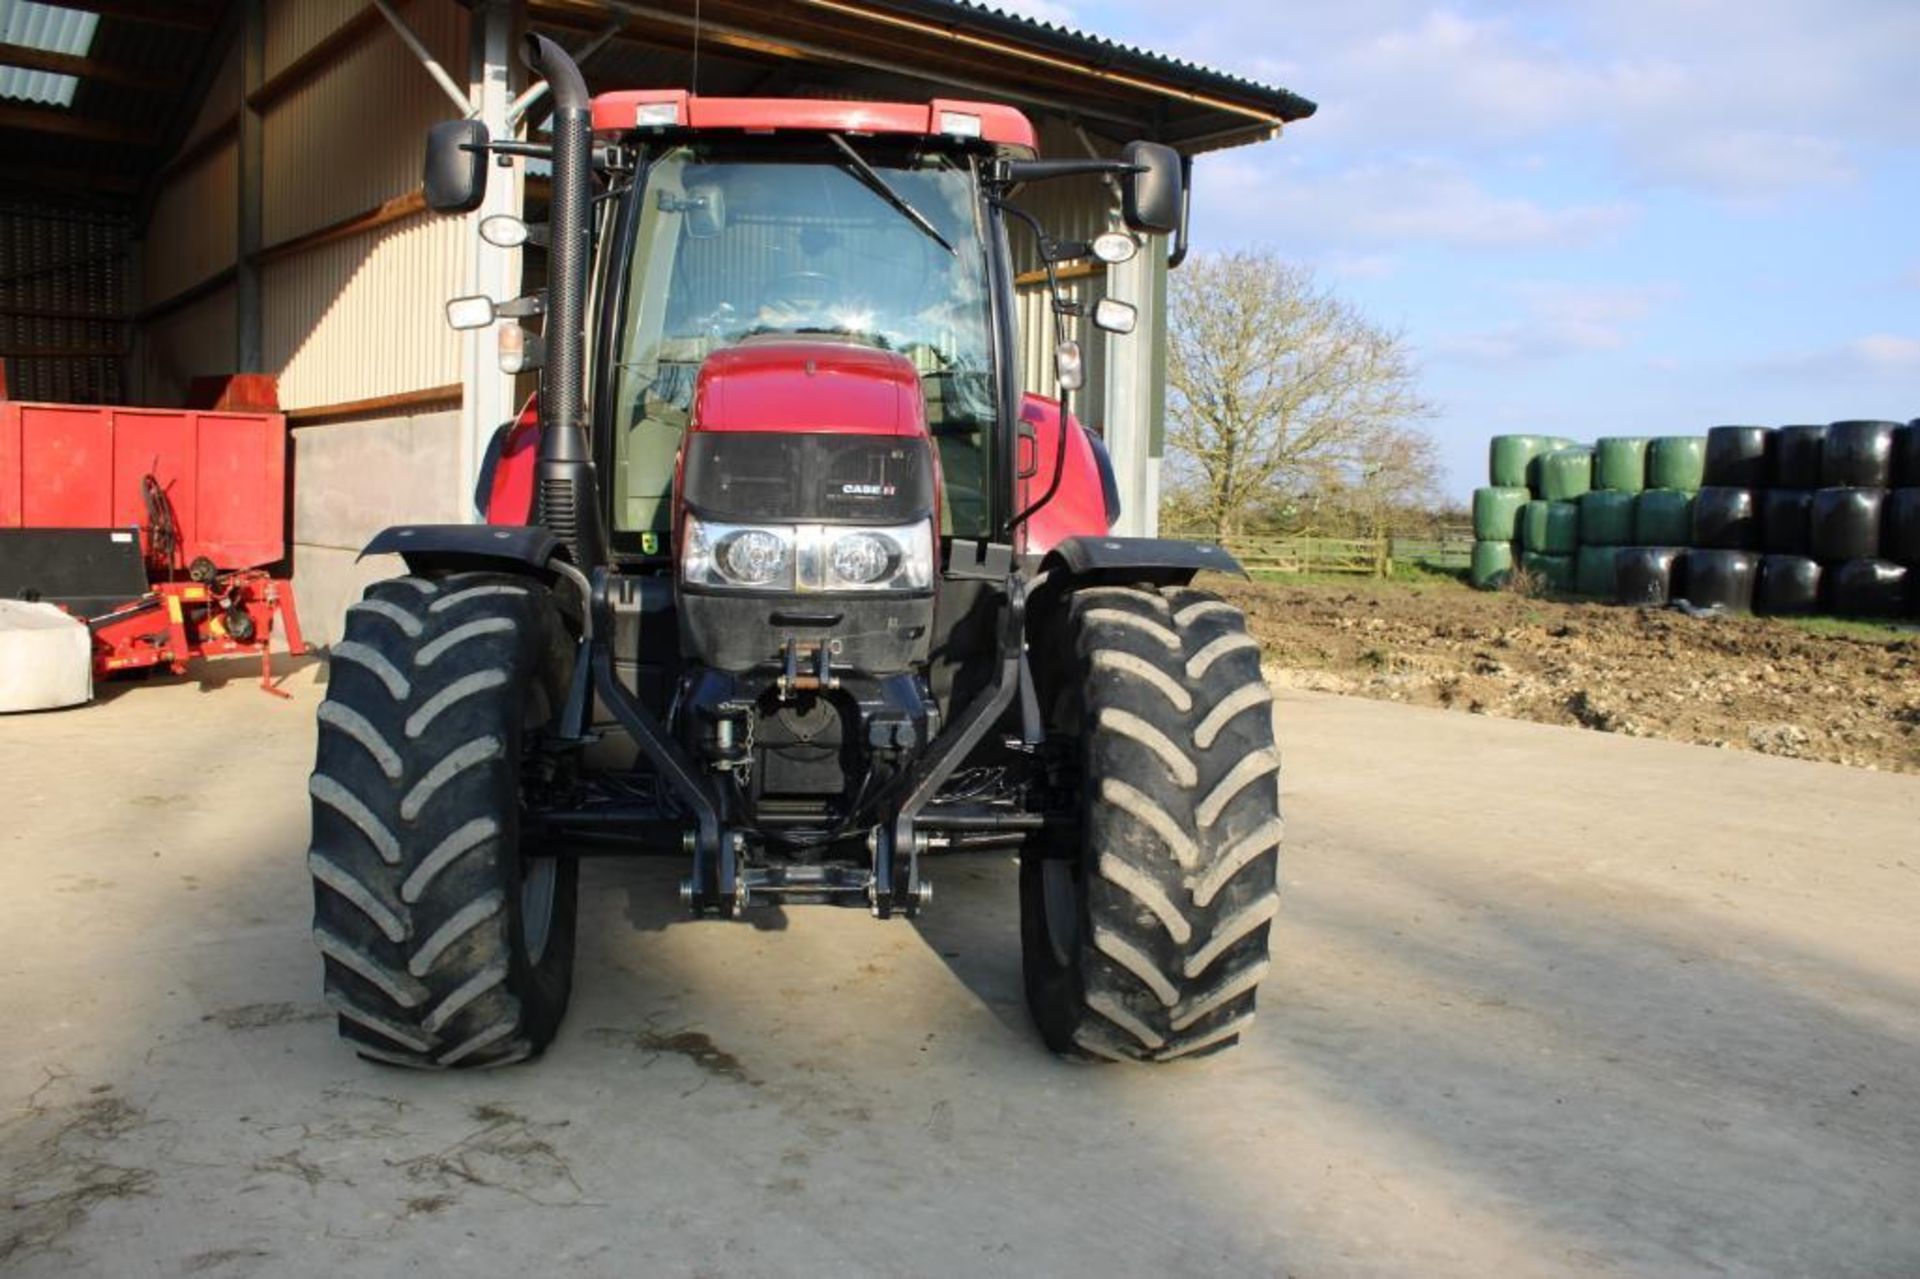 2013 Case Maxxum 140 50kph 4wd Powershift tractor with multicontroller joystick, front linkage, cab - Image 23 of 40